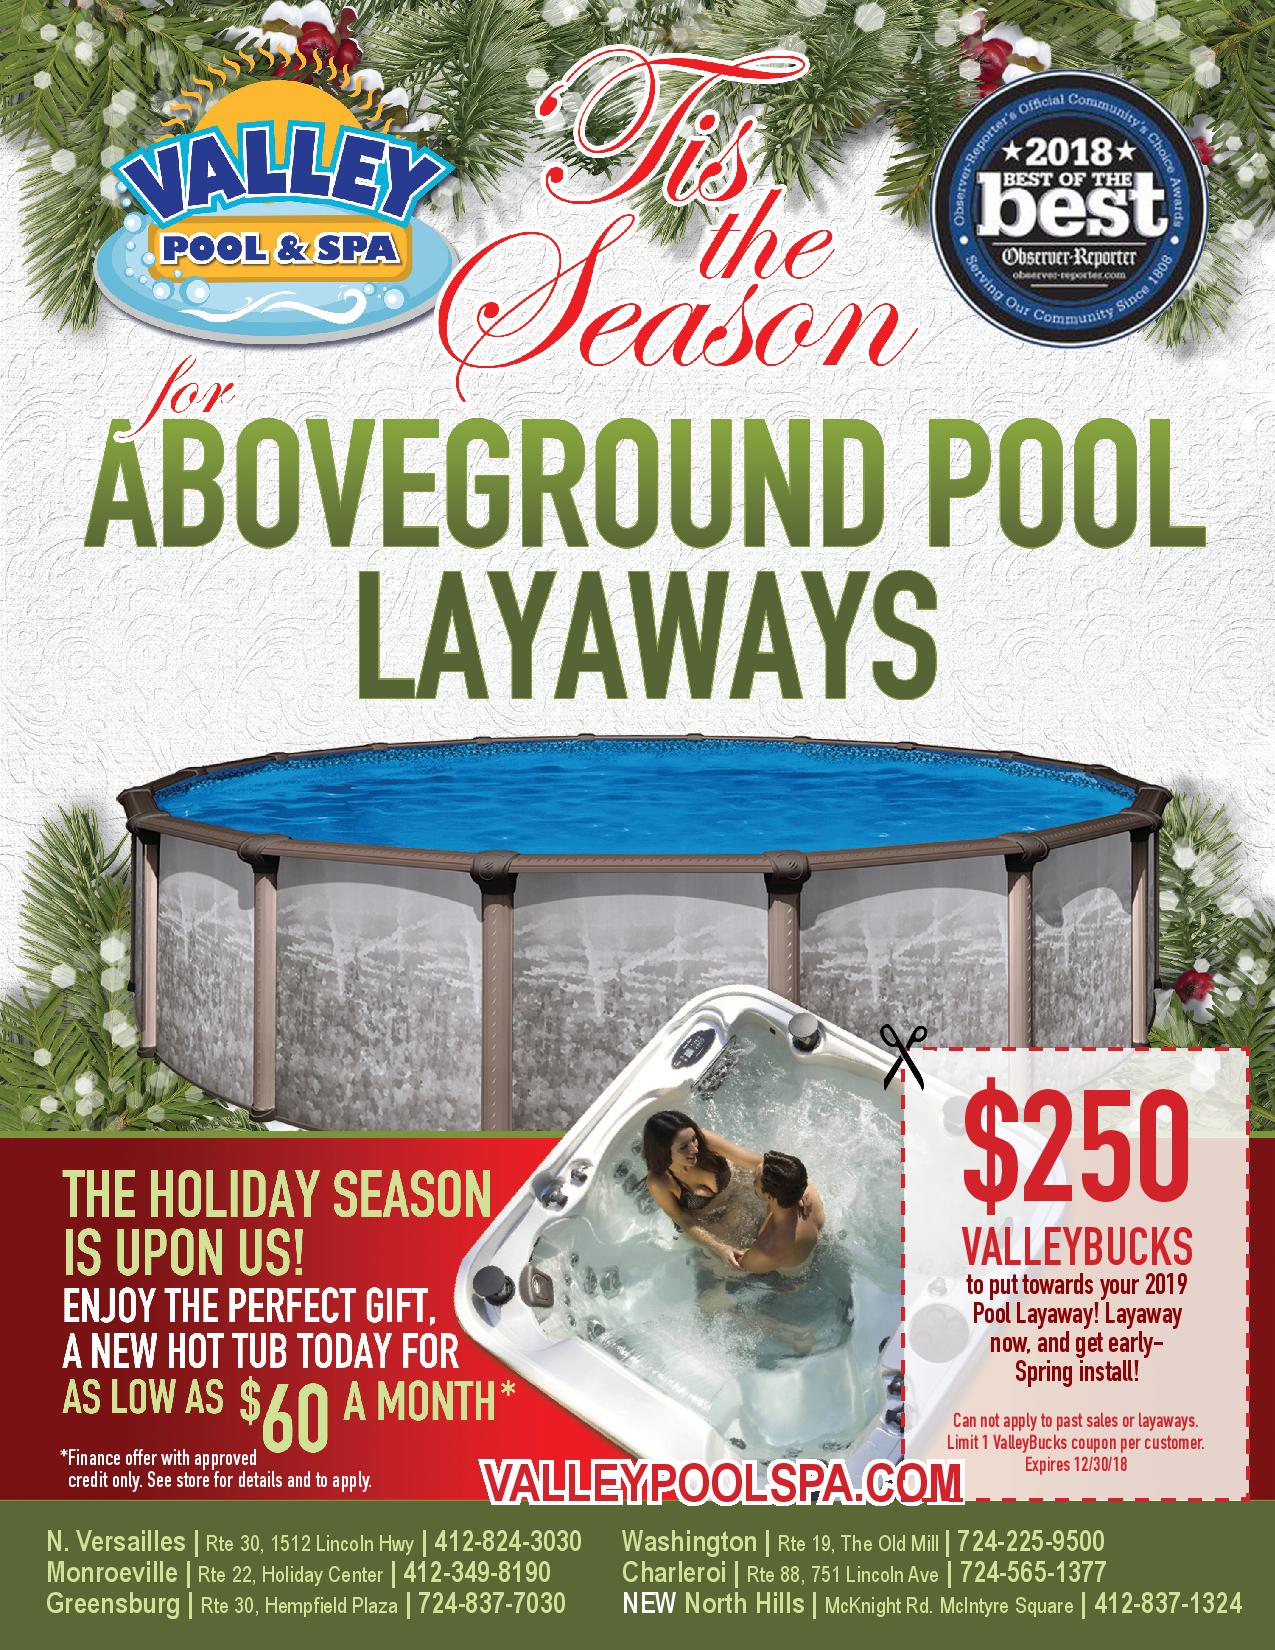 Above ground pool Layaway